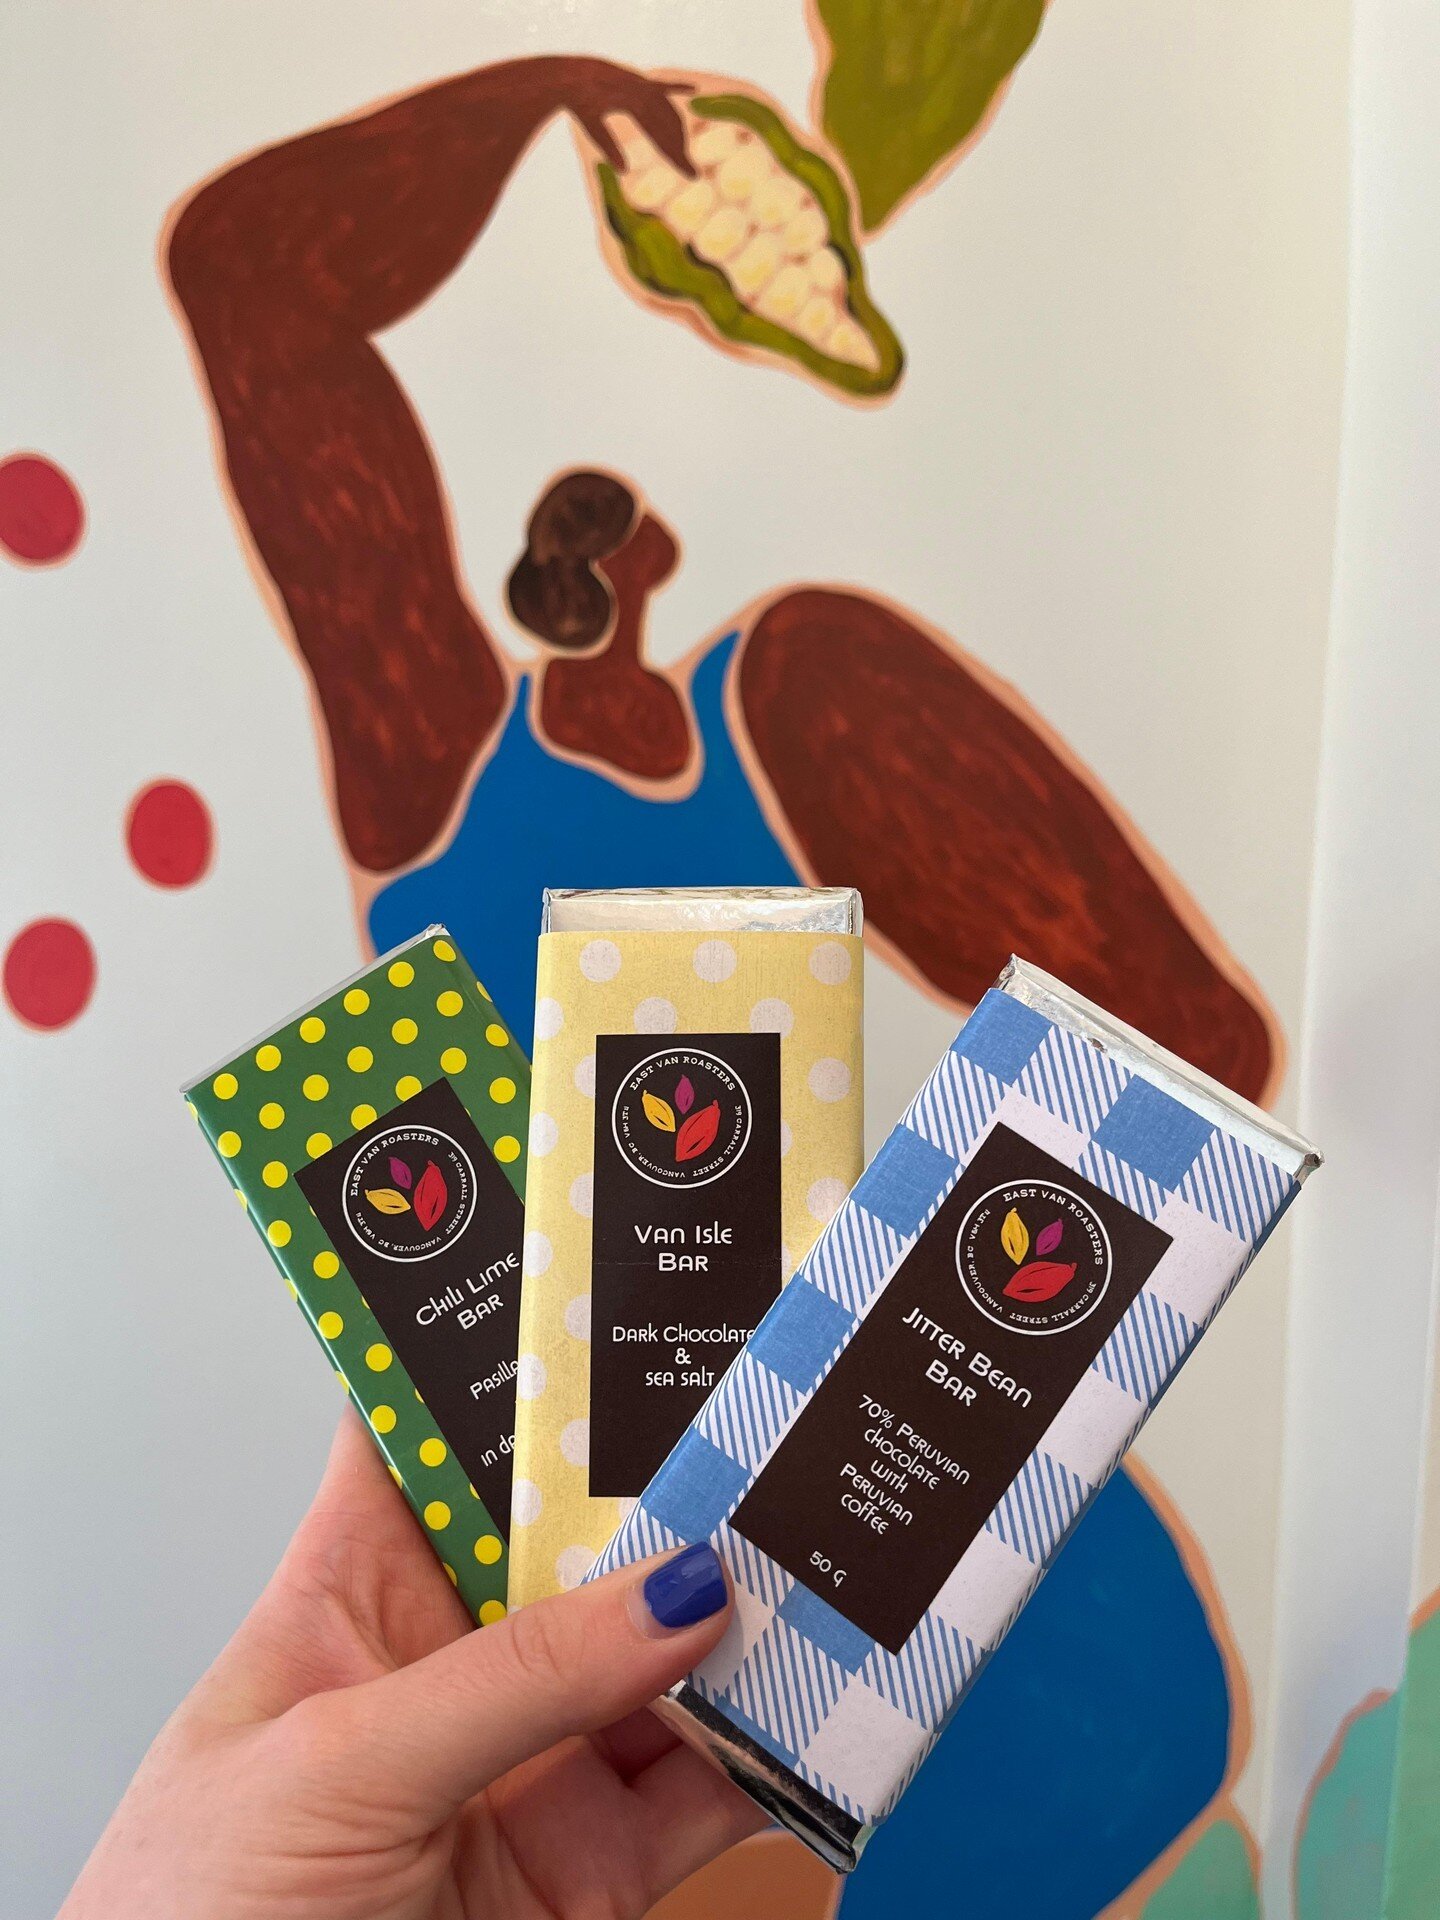 🍫✨ Embark on a tantalizing journey of flavour with East Van Roasters' trio of artisanal chocolate bars! 

From the fiery kick of Chili Lime to the sublime fusion of dark chocolate and sea salt of Van Isle, and the invigorating blend of 70% Peruvian 